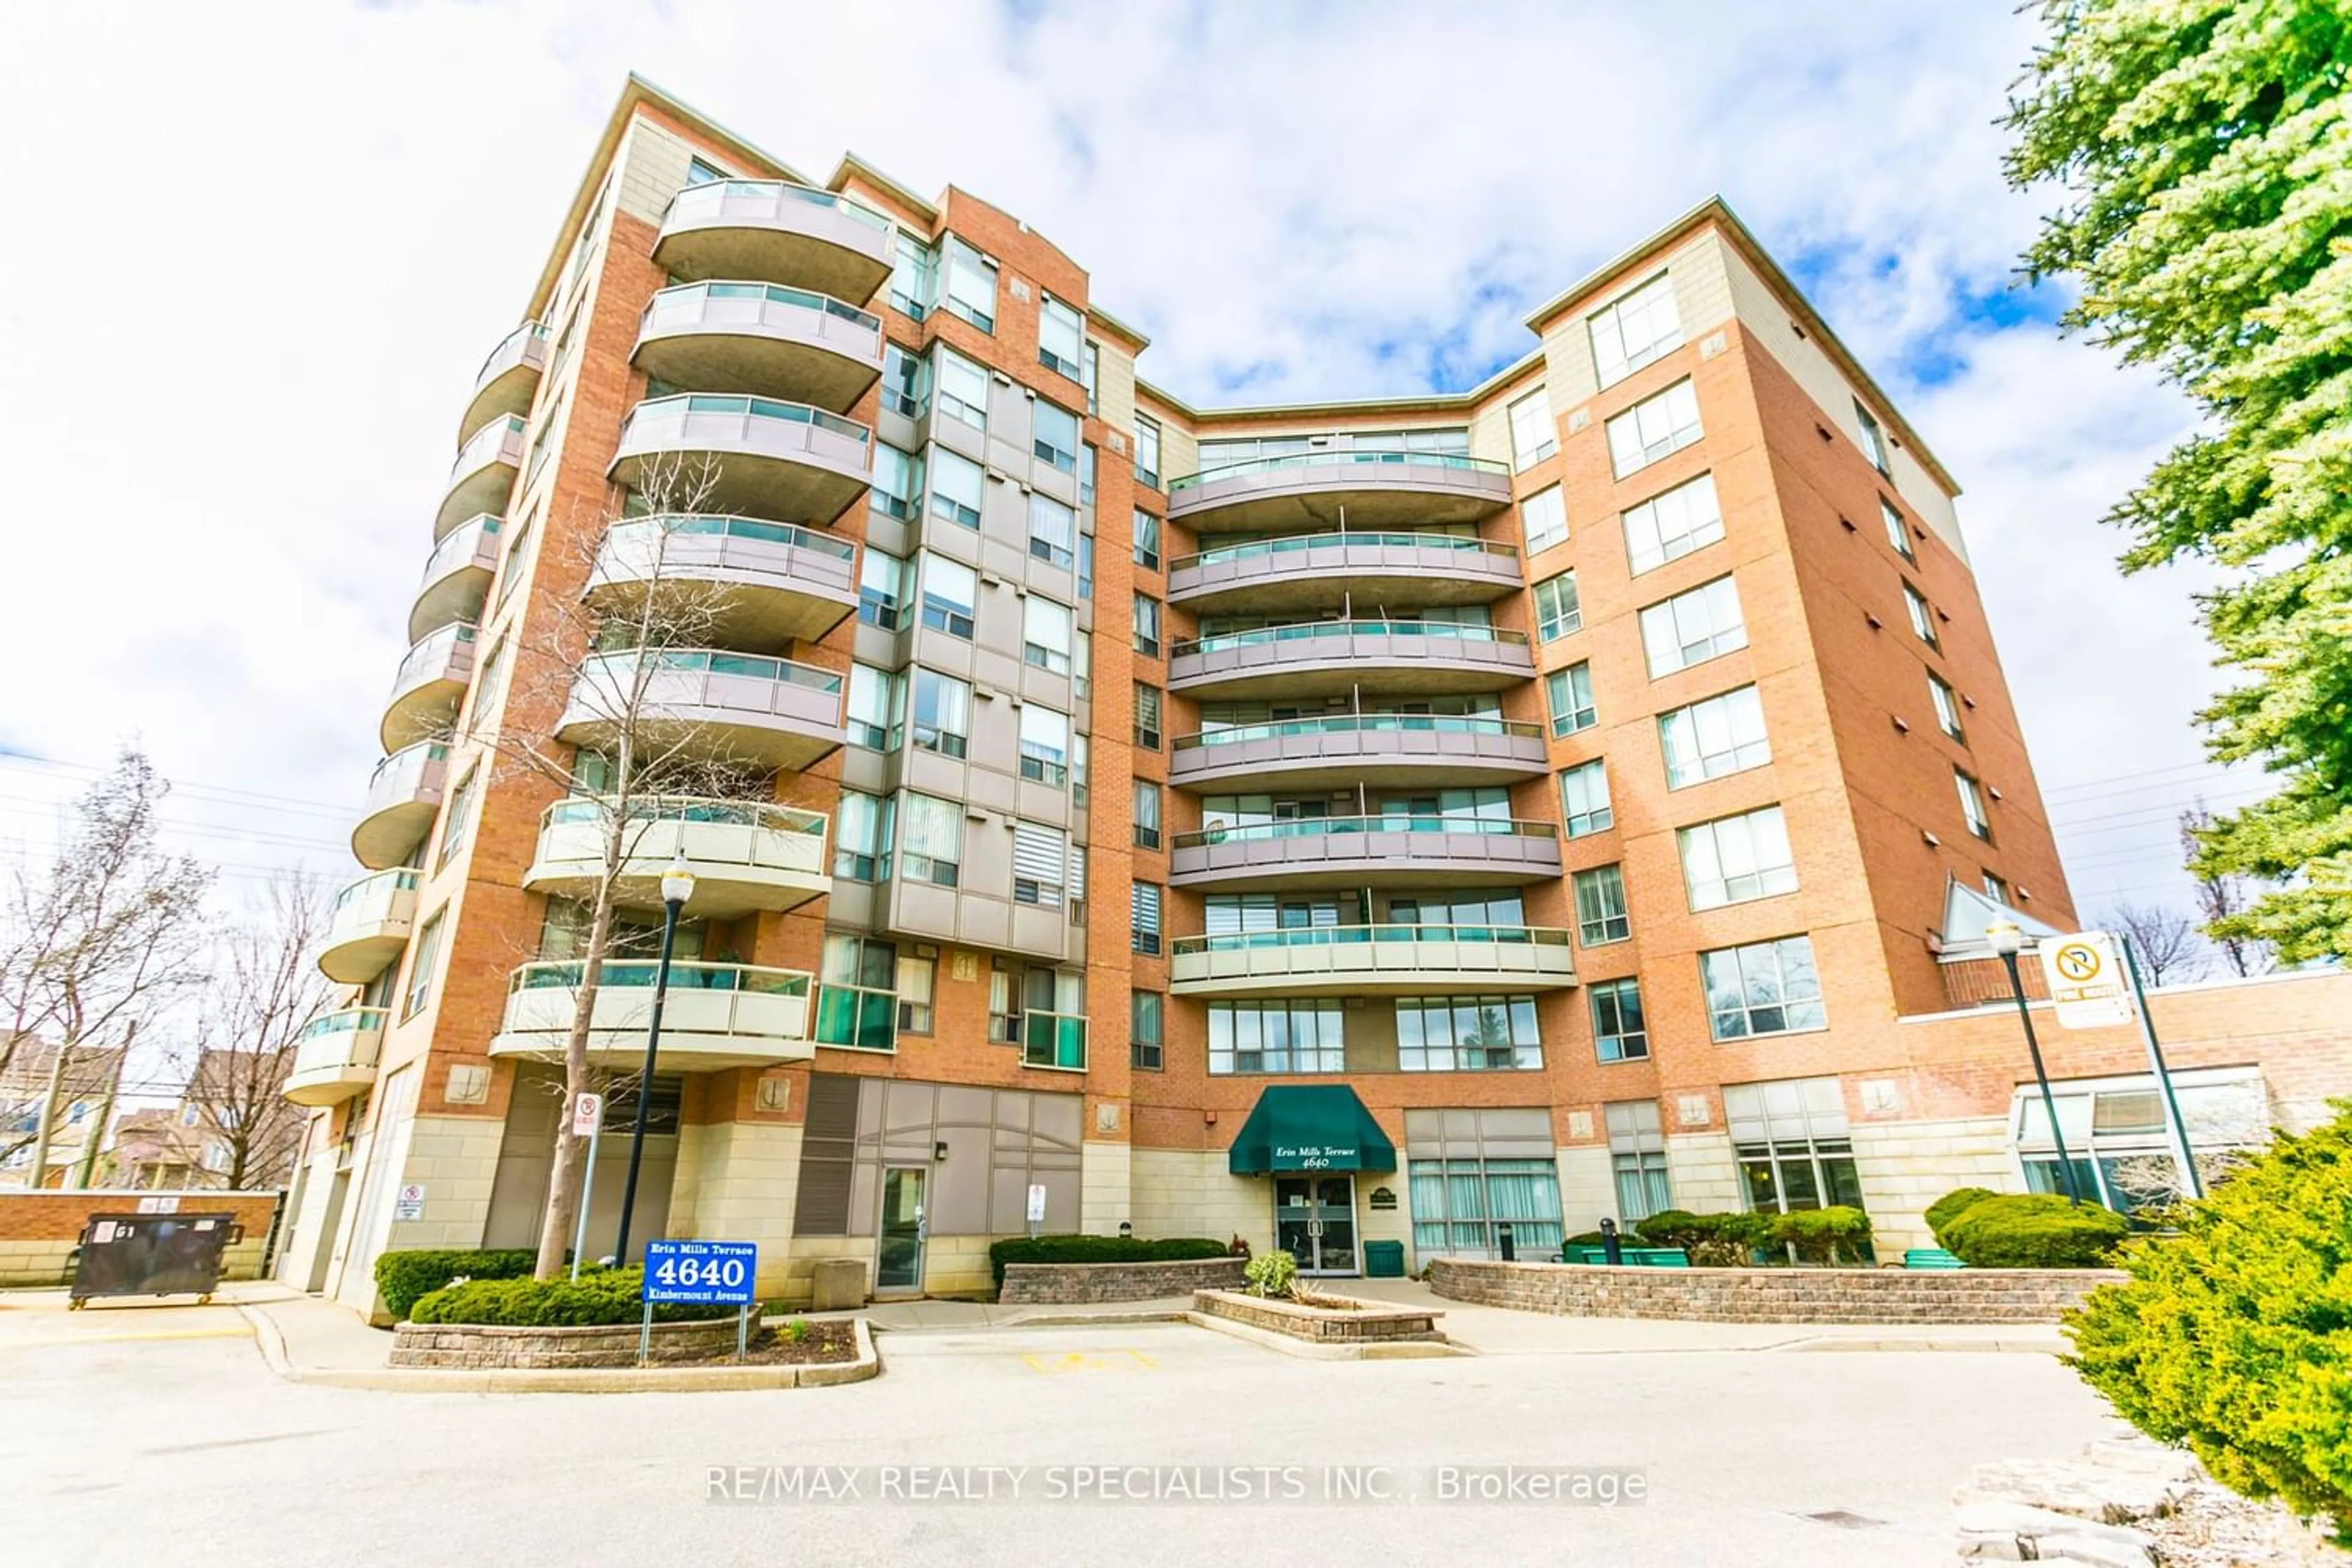 A pic from exterior of the house or condo for 4640 Kimbermount Ave #209, Mississauga Ontario L5M 5W6